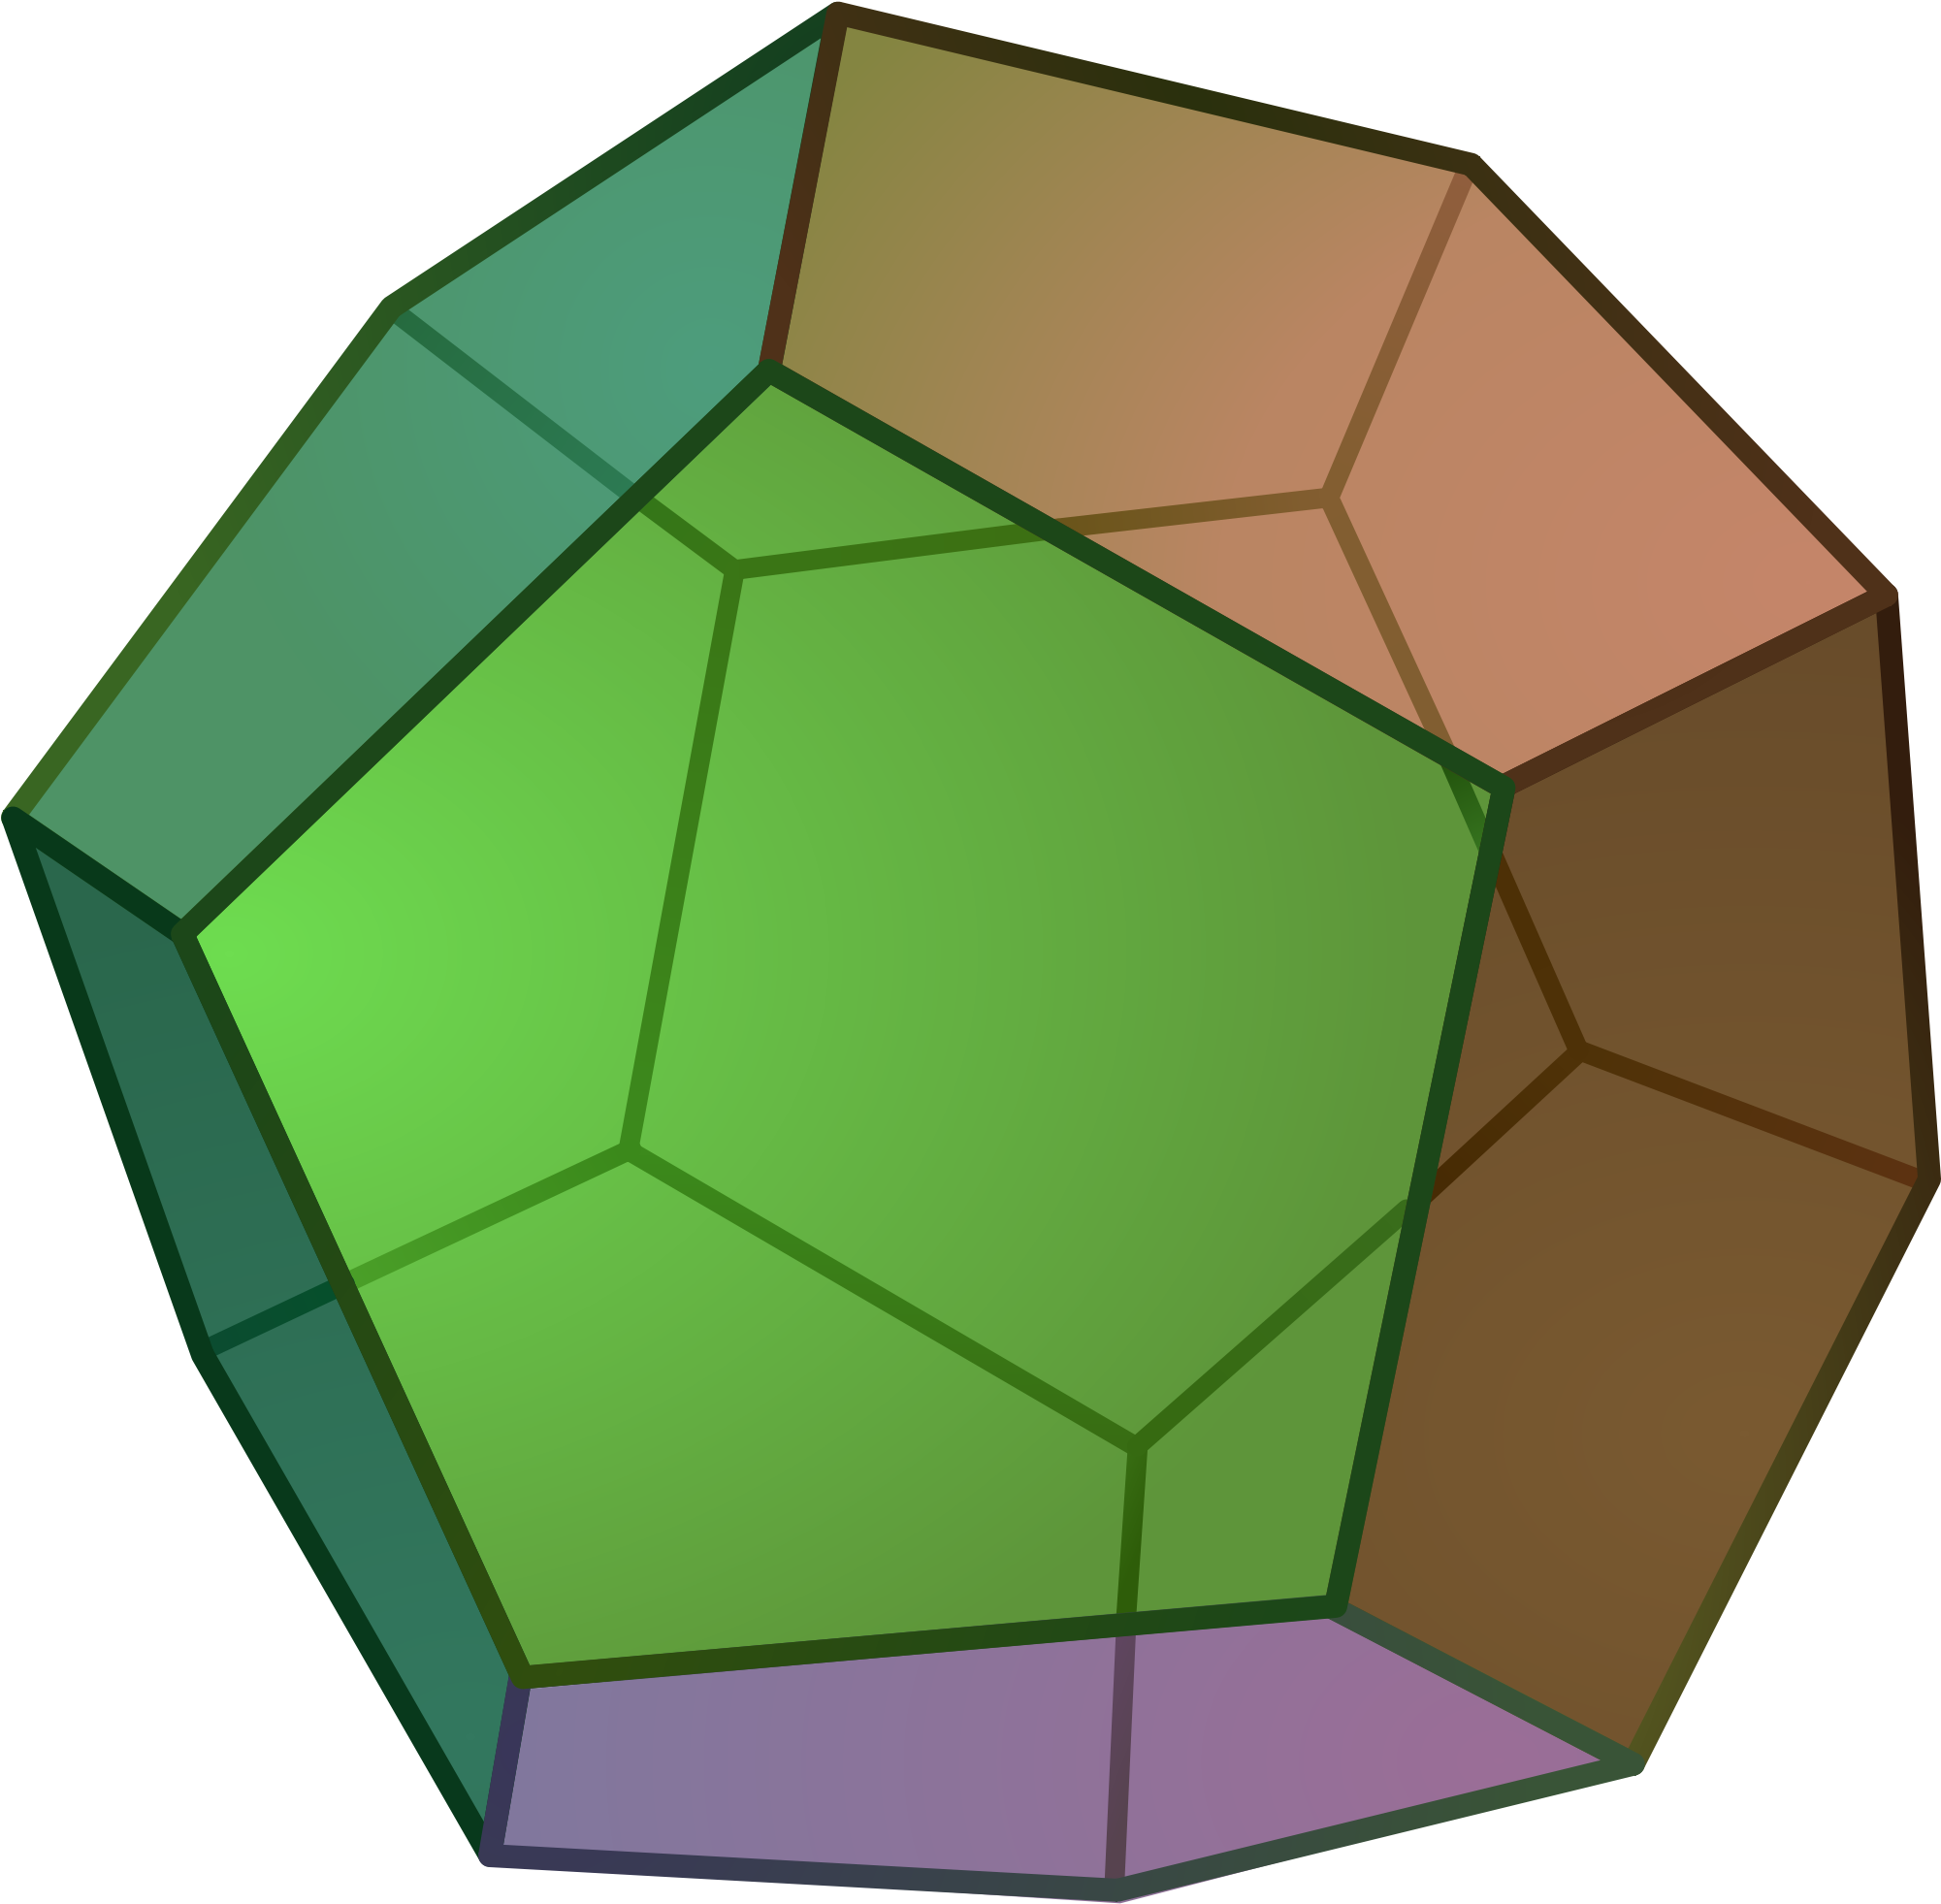 2000px Pov Ray Dodecahedron - Dodecahedron Prism (2000x2000)